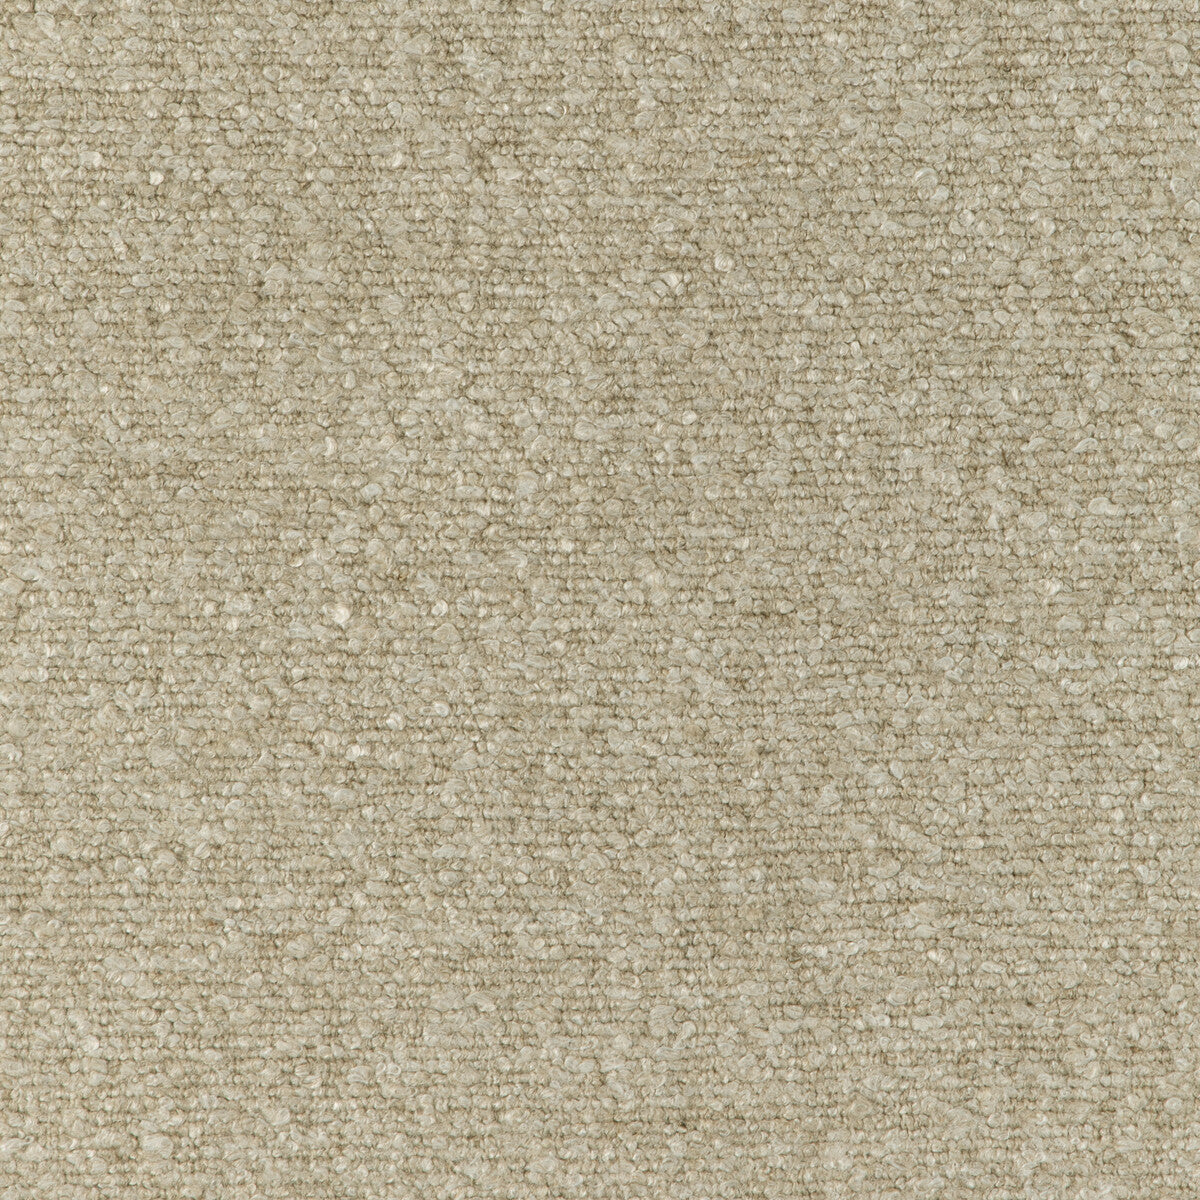 Linen Boucle fabric in flax color - pattern 36910.16.0 - by Kravet Couture in the Atelier Weaves collection